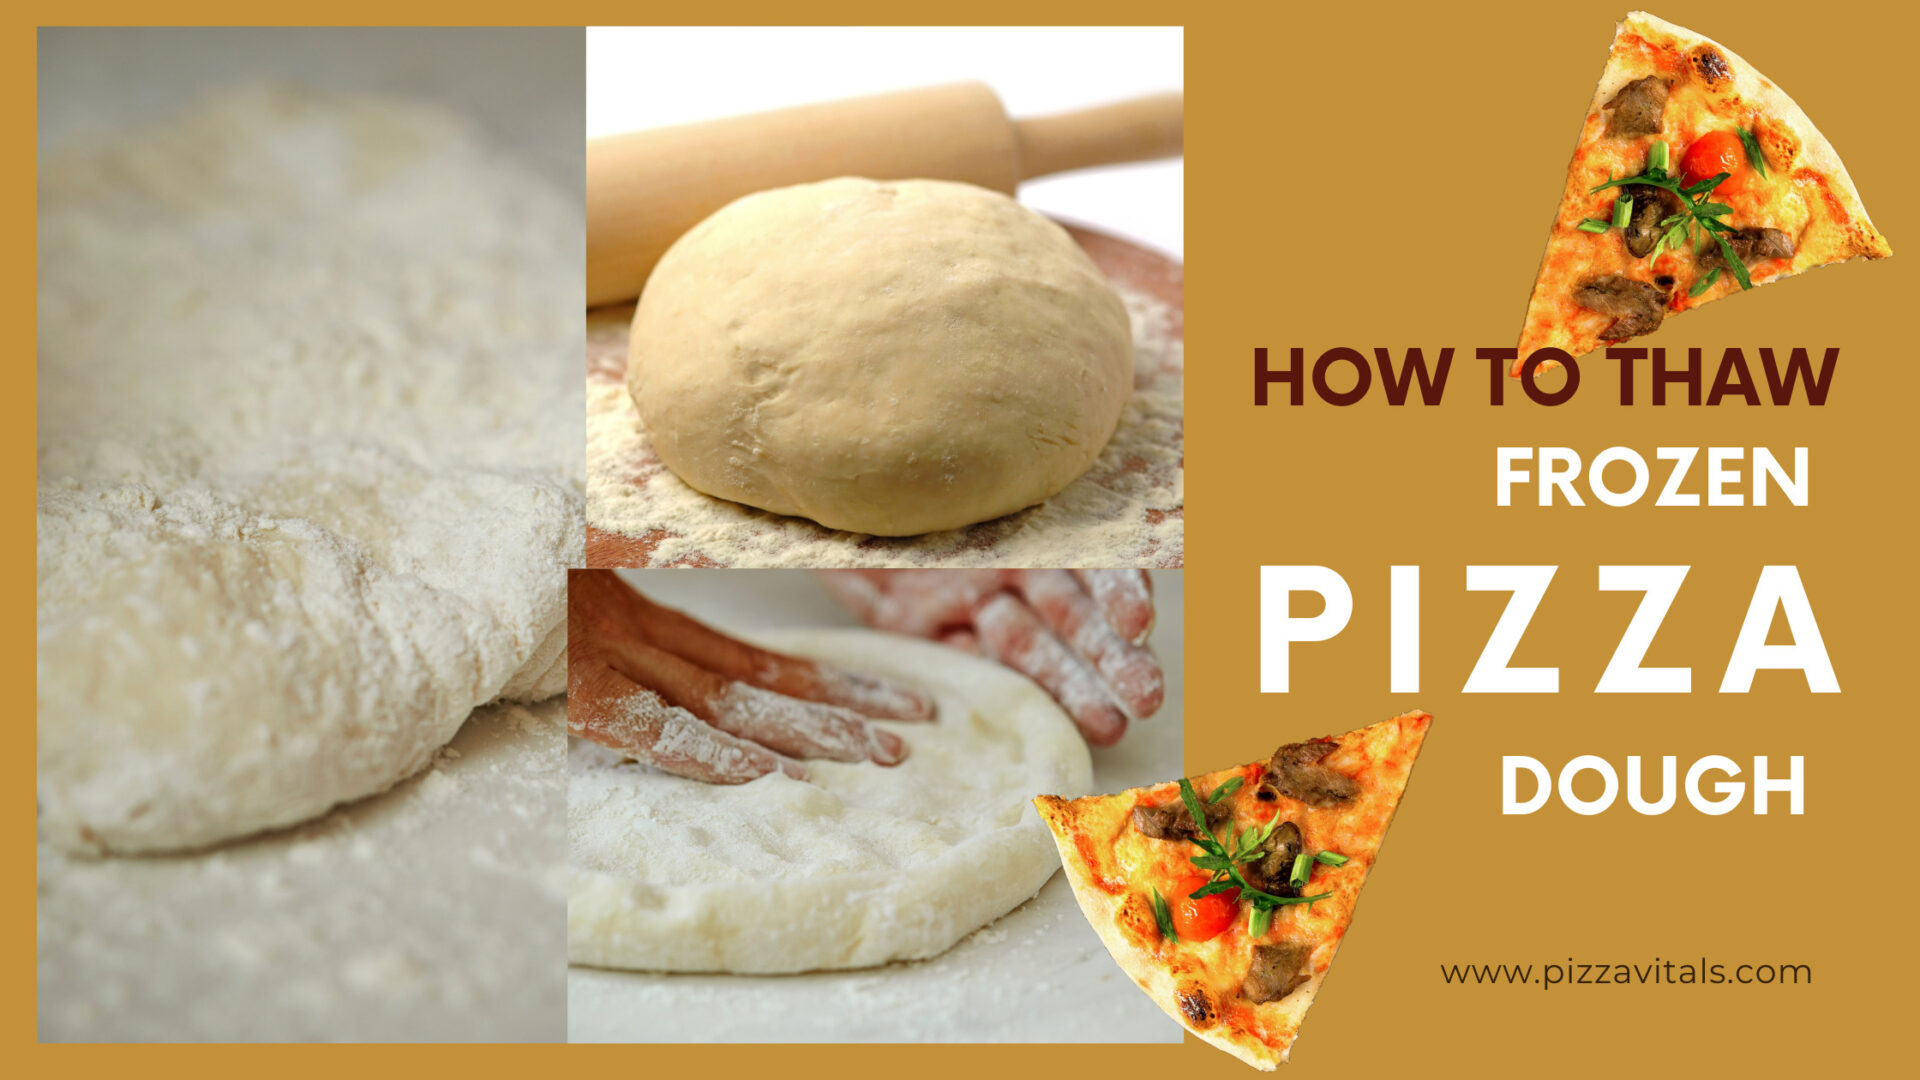 How To Thaw Frozen Pizza Dough: A Step-By-Step Guide